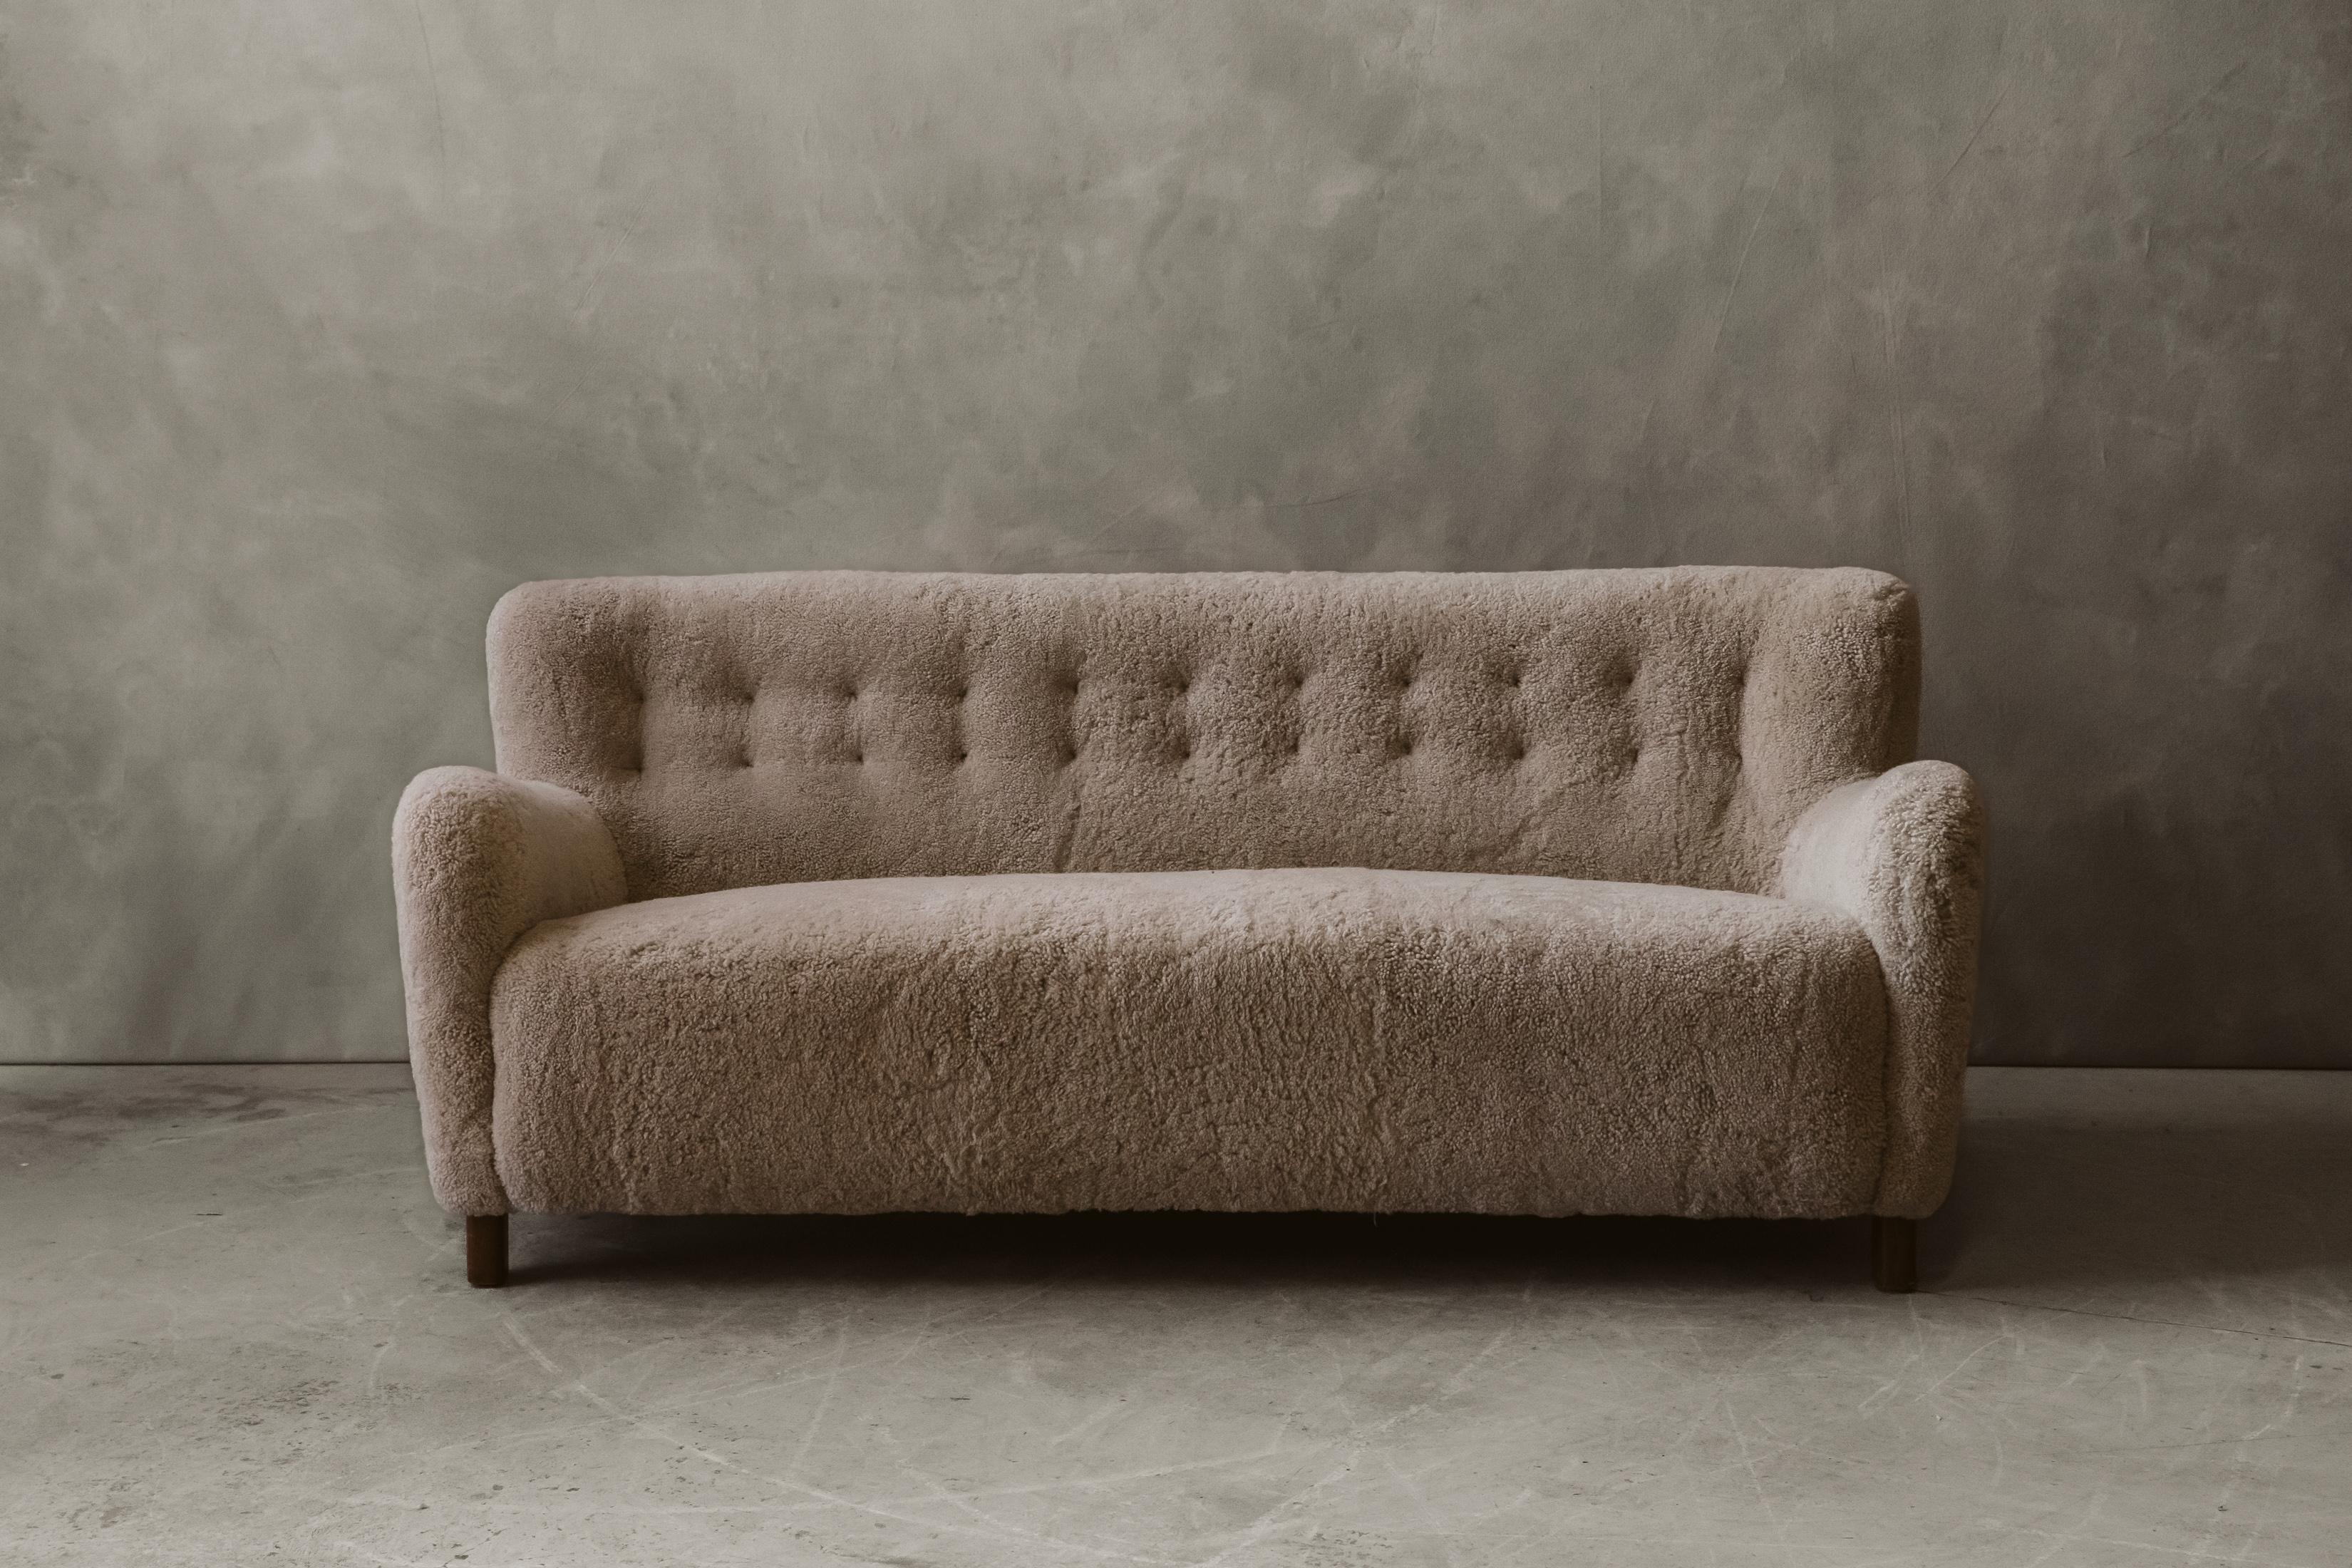 VIntage Fritz Hansen Șofa, Model 1669, Circa 1950.  Superb and rare model upholstered in very soft off white shearling.  

We don't have the time to write an extensive description on each of our pieces. We prefer to speak directly with our clients. 